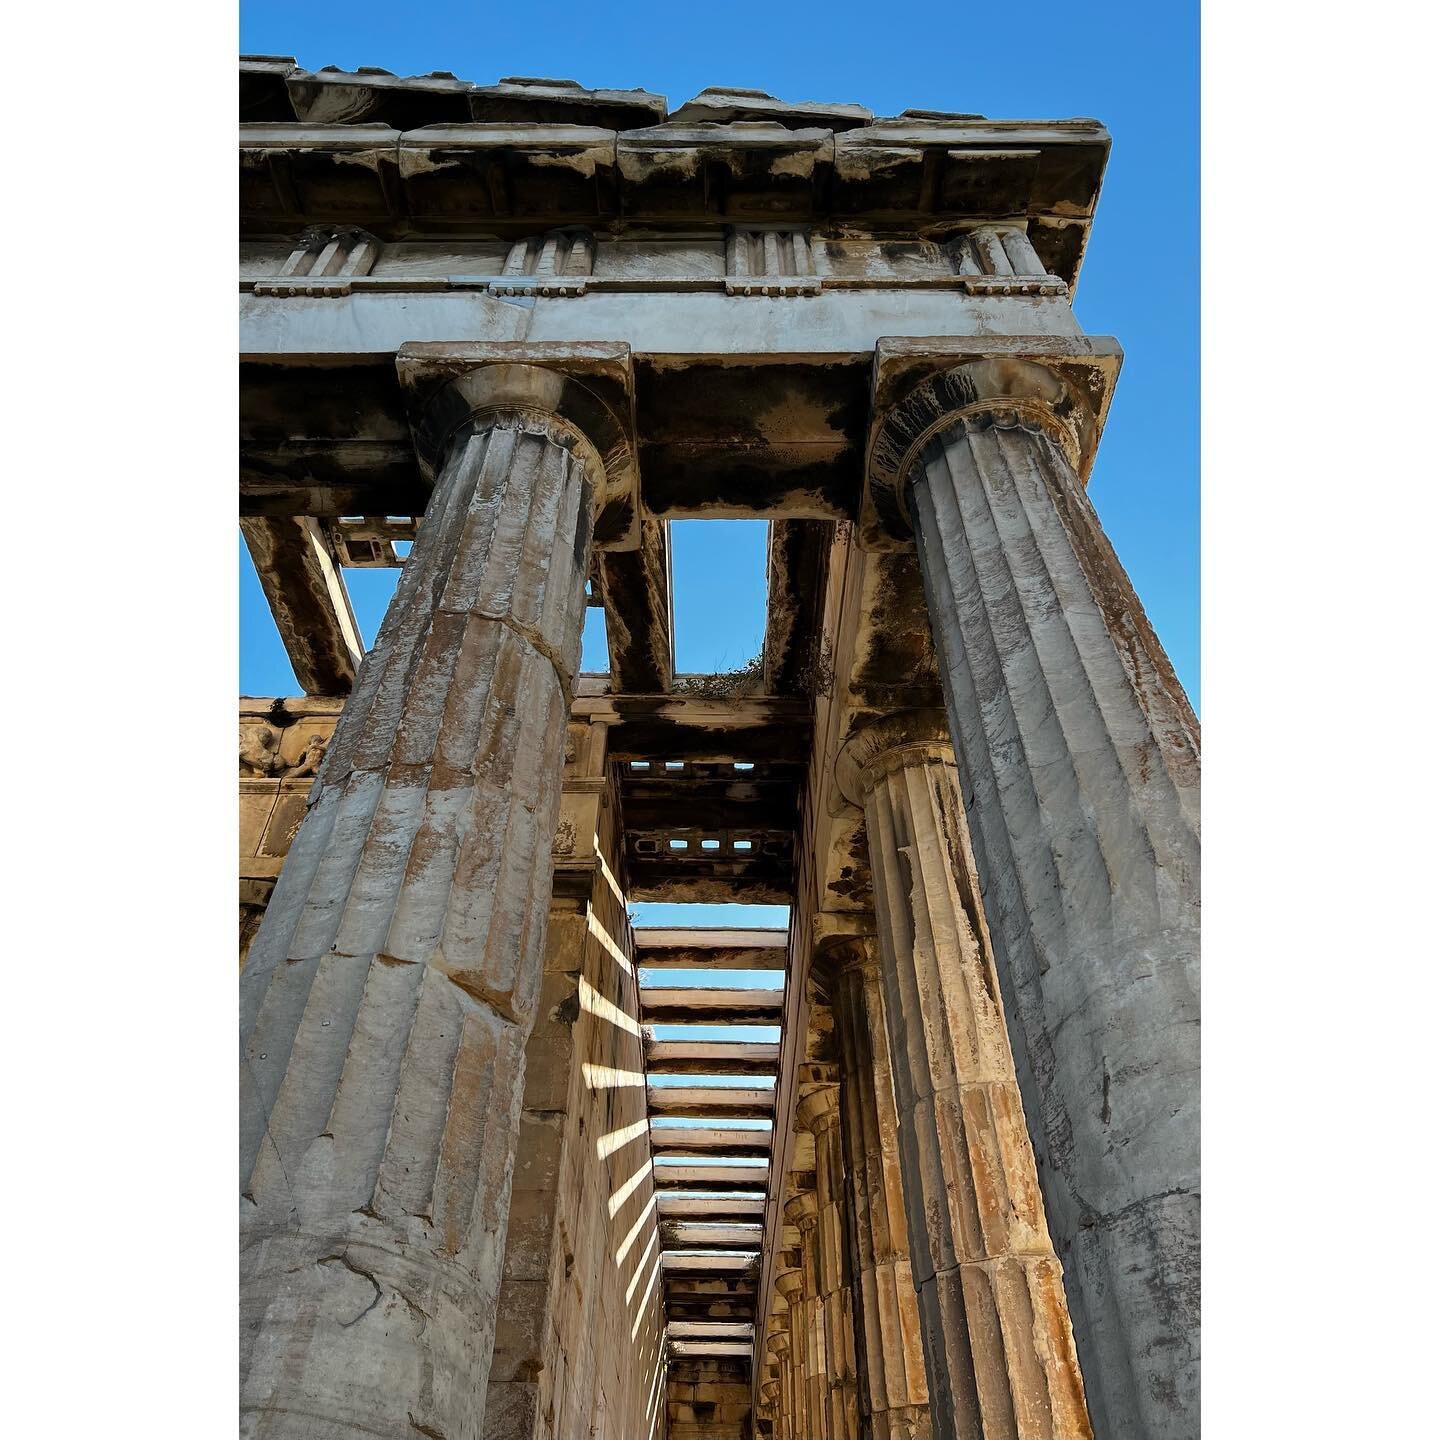 Philosophy, History, Medicine, Geometry, Democracy, Theatre. They all came from one culture - the cradle of Western Civilization. Thank you Greece 🇬🇷
.
.
.
#greece #whosnext